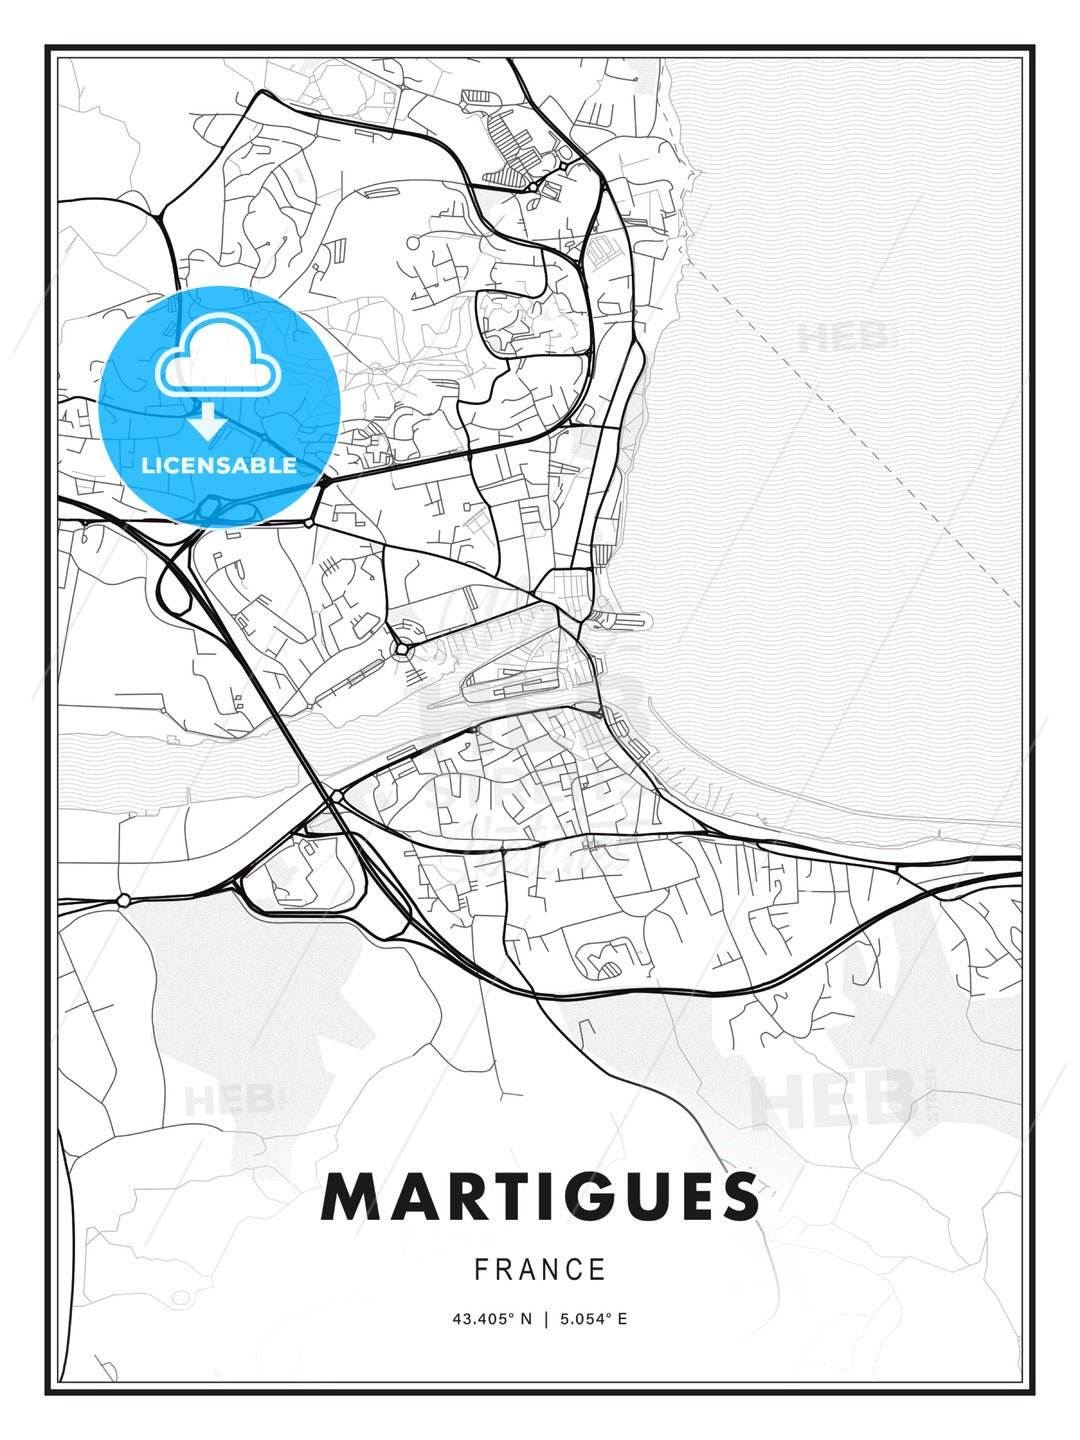 Martigues, France, Modern Print Template in Various Formats - HEBSTREITS Sketches